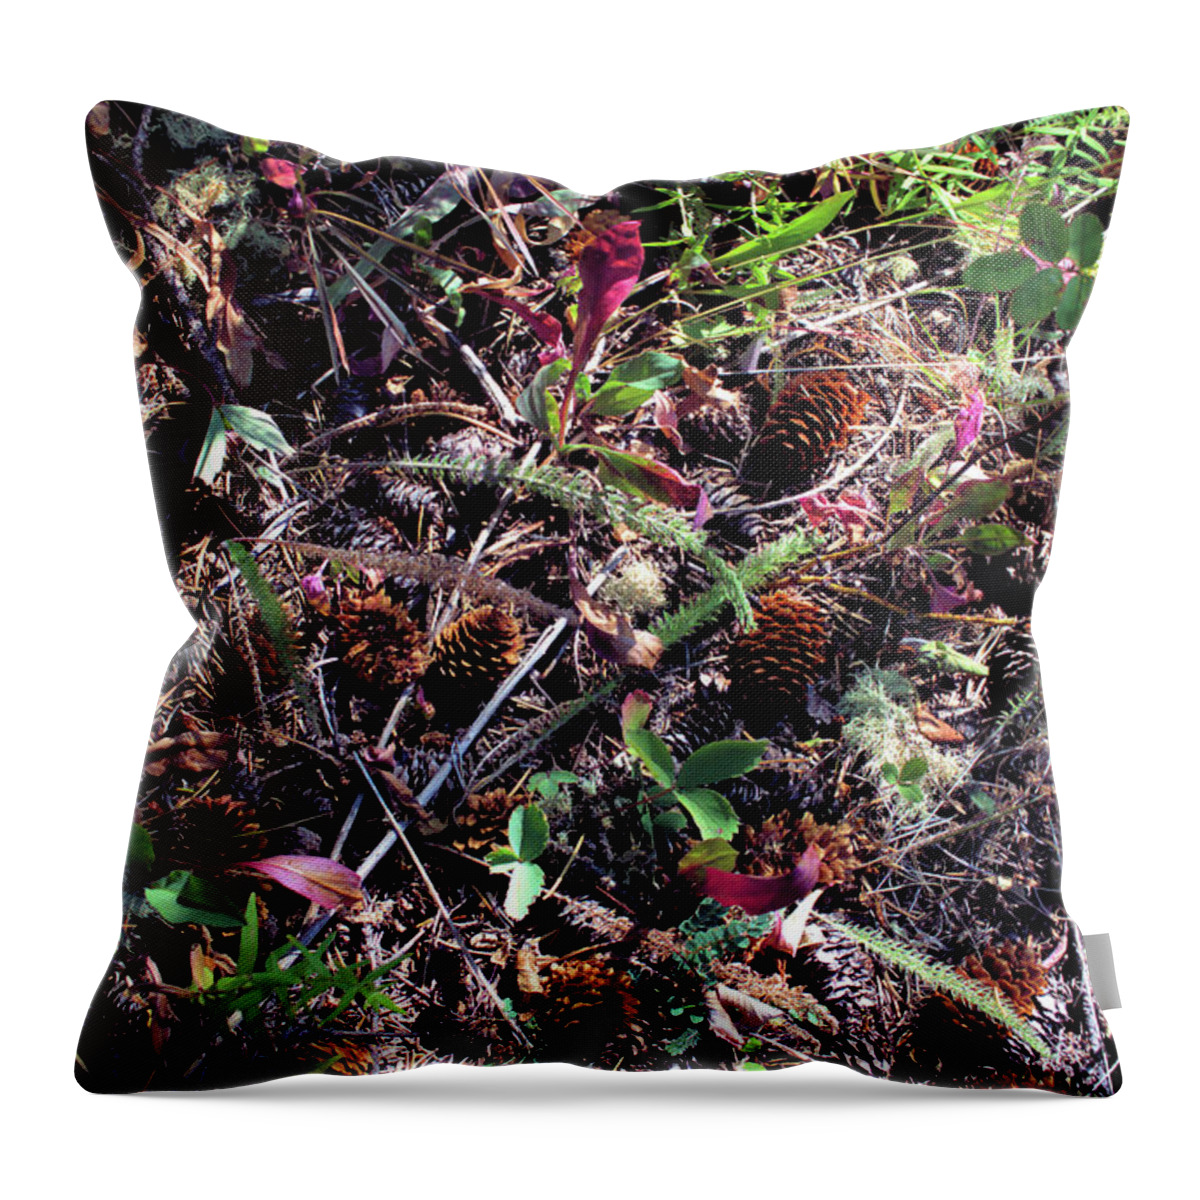 Pine Cones Throw Pillow featuring the photograph Forest Floor by Scott Carlton